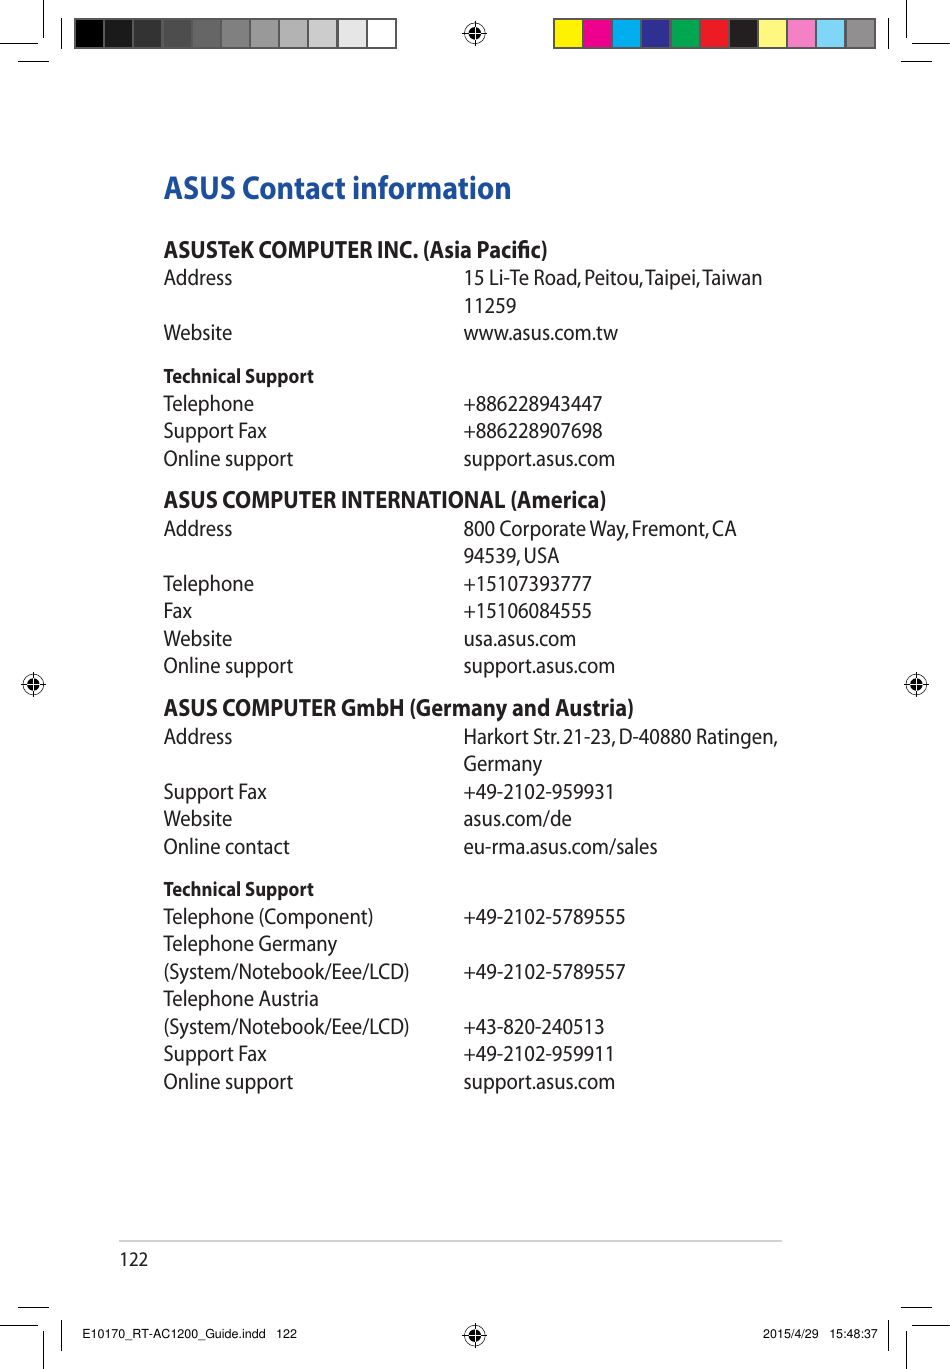 122ASUS Contact informationASUSTeK COMPUTER INC. (Asia Pacic)Address   15Li-TeRoad,Peitou,Taipei,Taiwan11259Website     www.asus.com.twTechnical SupportTelephone     +886228943447SupportFax   +886228907698Online support      support.asus.comASUS COMPUTER INTERNATIONAL (America)Address   800CorporateWay,Fremont,CA94539, USATelephone   +15107393777Fax   +15106084555Website     usa.asus.comOnline support      support.asus.comASUS COMPUTER GmbH (Germany and Austria)Address   HarkortStr.21-23,D-40880Ratingen,GermanySupportFax   +49-2102-959931Website   asus.com/deOnlinecontact   eu-rma.asus.com/salesTechnical SupportTelephone(Component)  +49-2102-5789555Telephone Germany (System/Notebook/Eee/LCD) +49-2102-5789557Telephone Austria (System/Notebook/Eee/LCD) +43-820-240513SupportFax   +49-2102-959911Online support      support.asus.comE10170_RT-AC1200_Guide.indd   122 2015/4/29   15:48:37